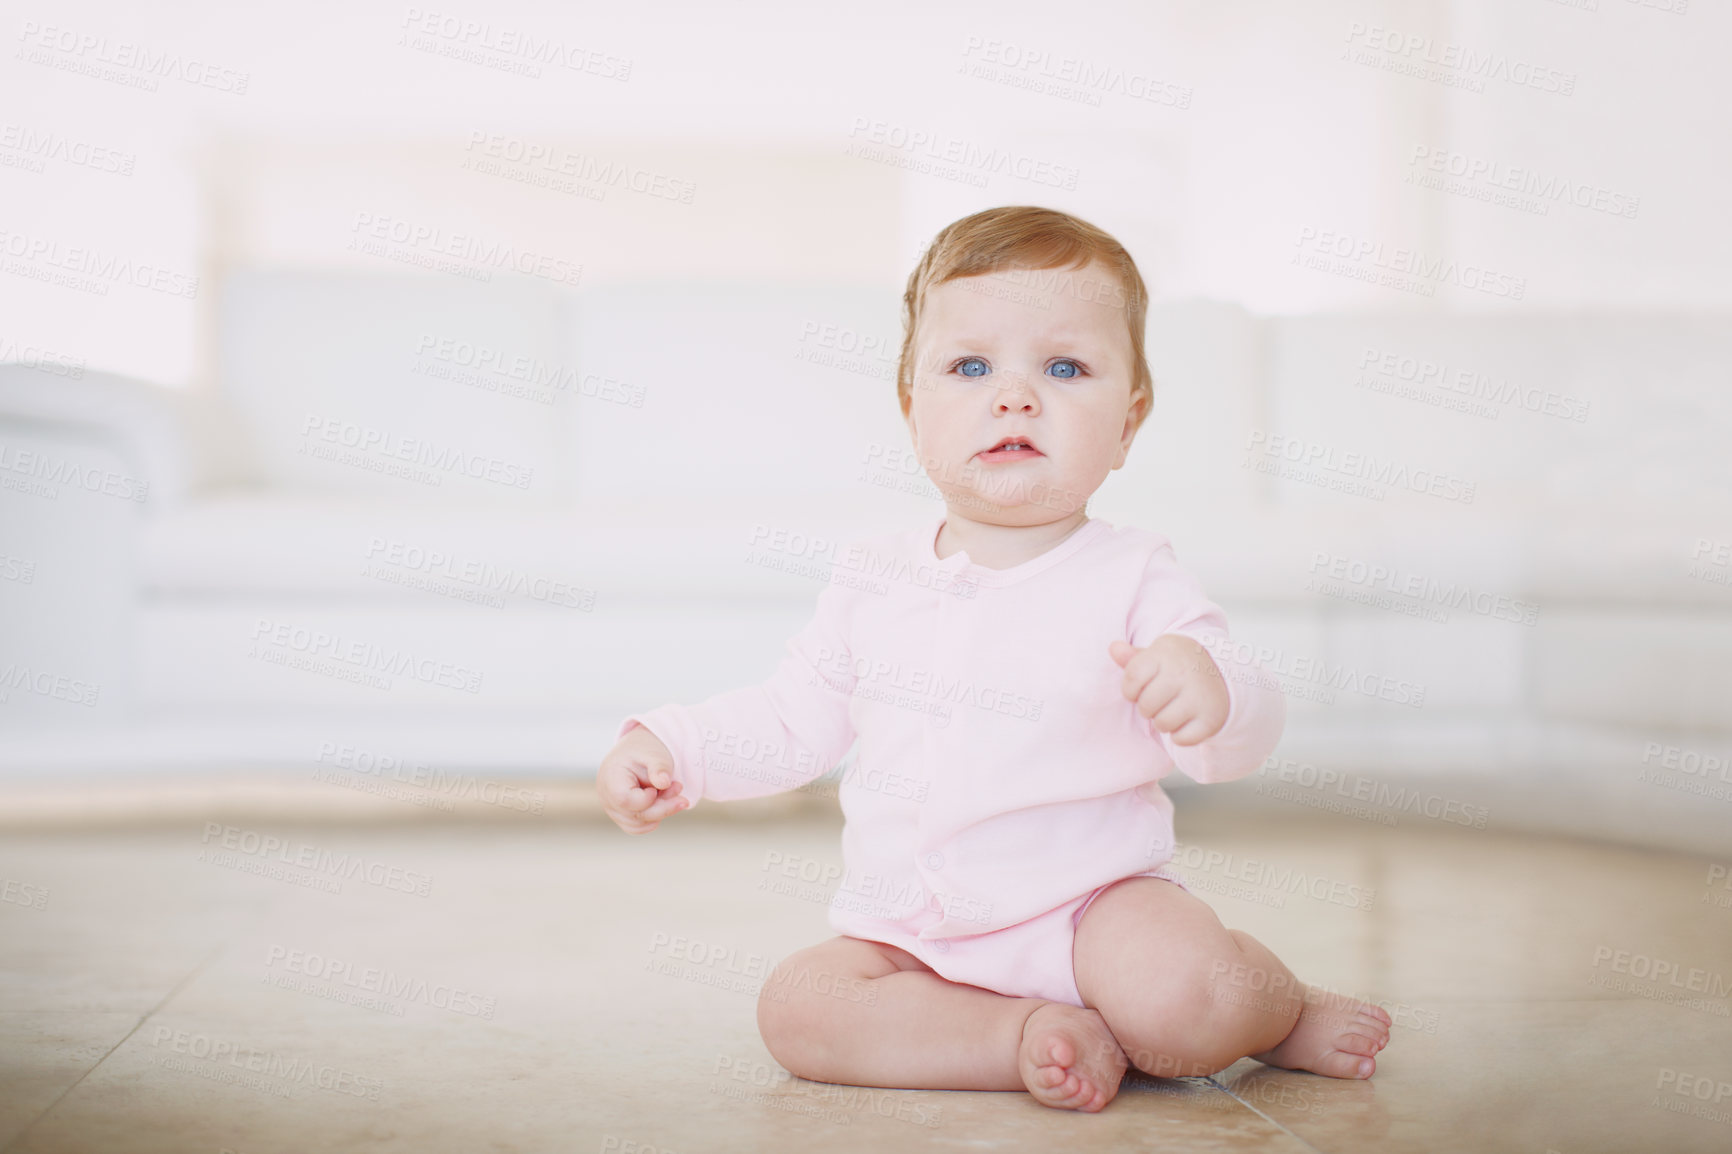 Buy stock photo An adorable baby girl sitting by herself on the living room floor